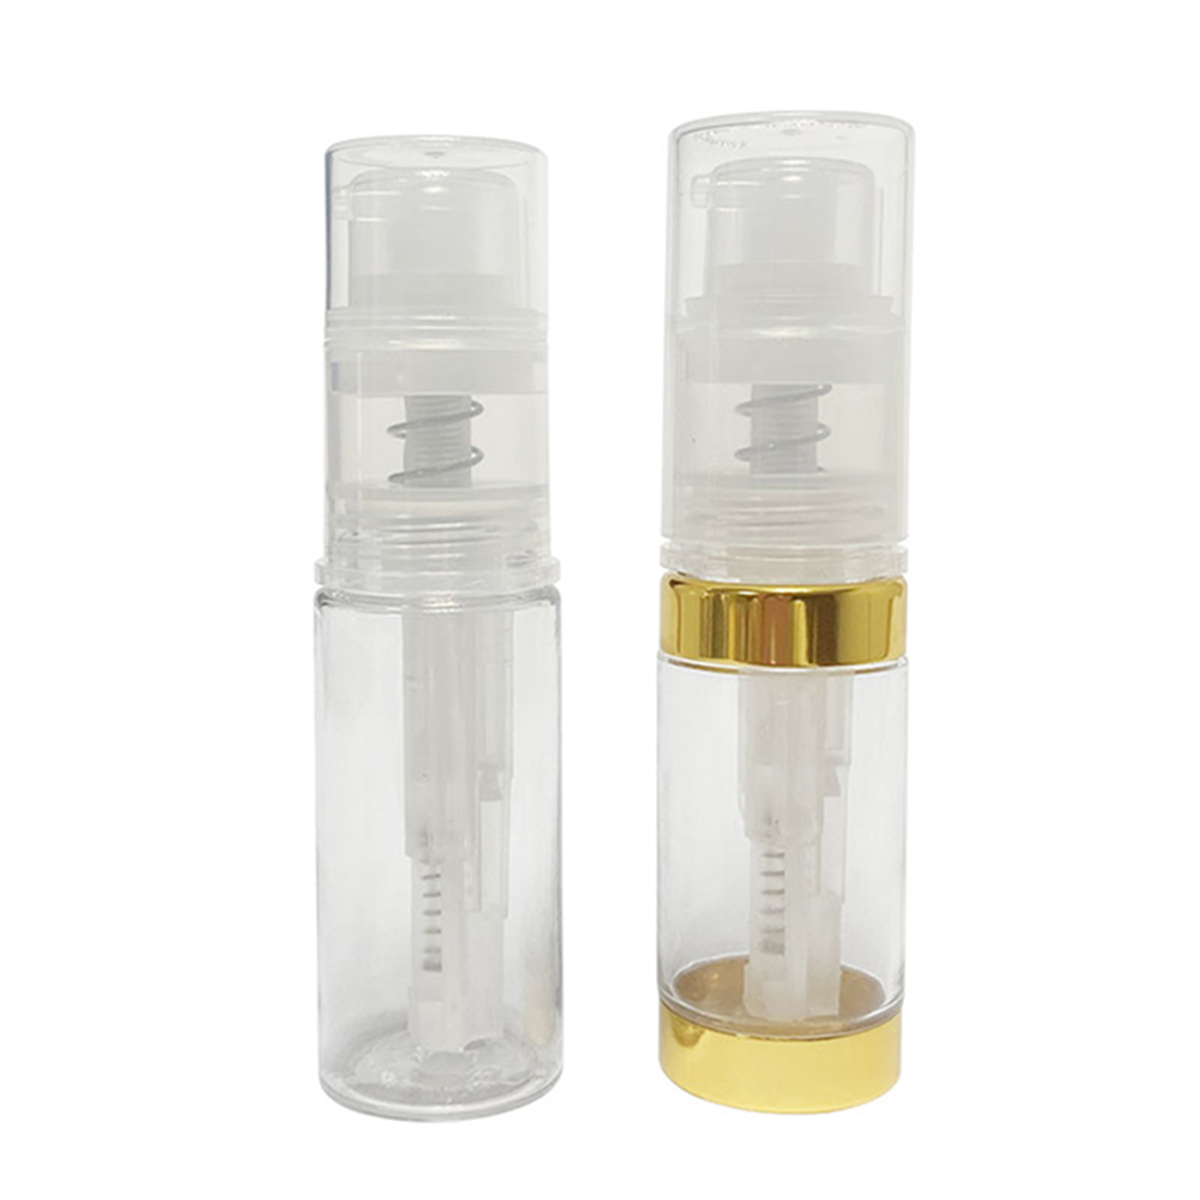 Top Suppliers Best Quality Wholesale Cosmetic Packaging Perfume Bottle Empty Bottles Clear Perfume Glass Bottle with Plastic Cap and Mist Sprayer Pump Perfume Bottle